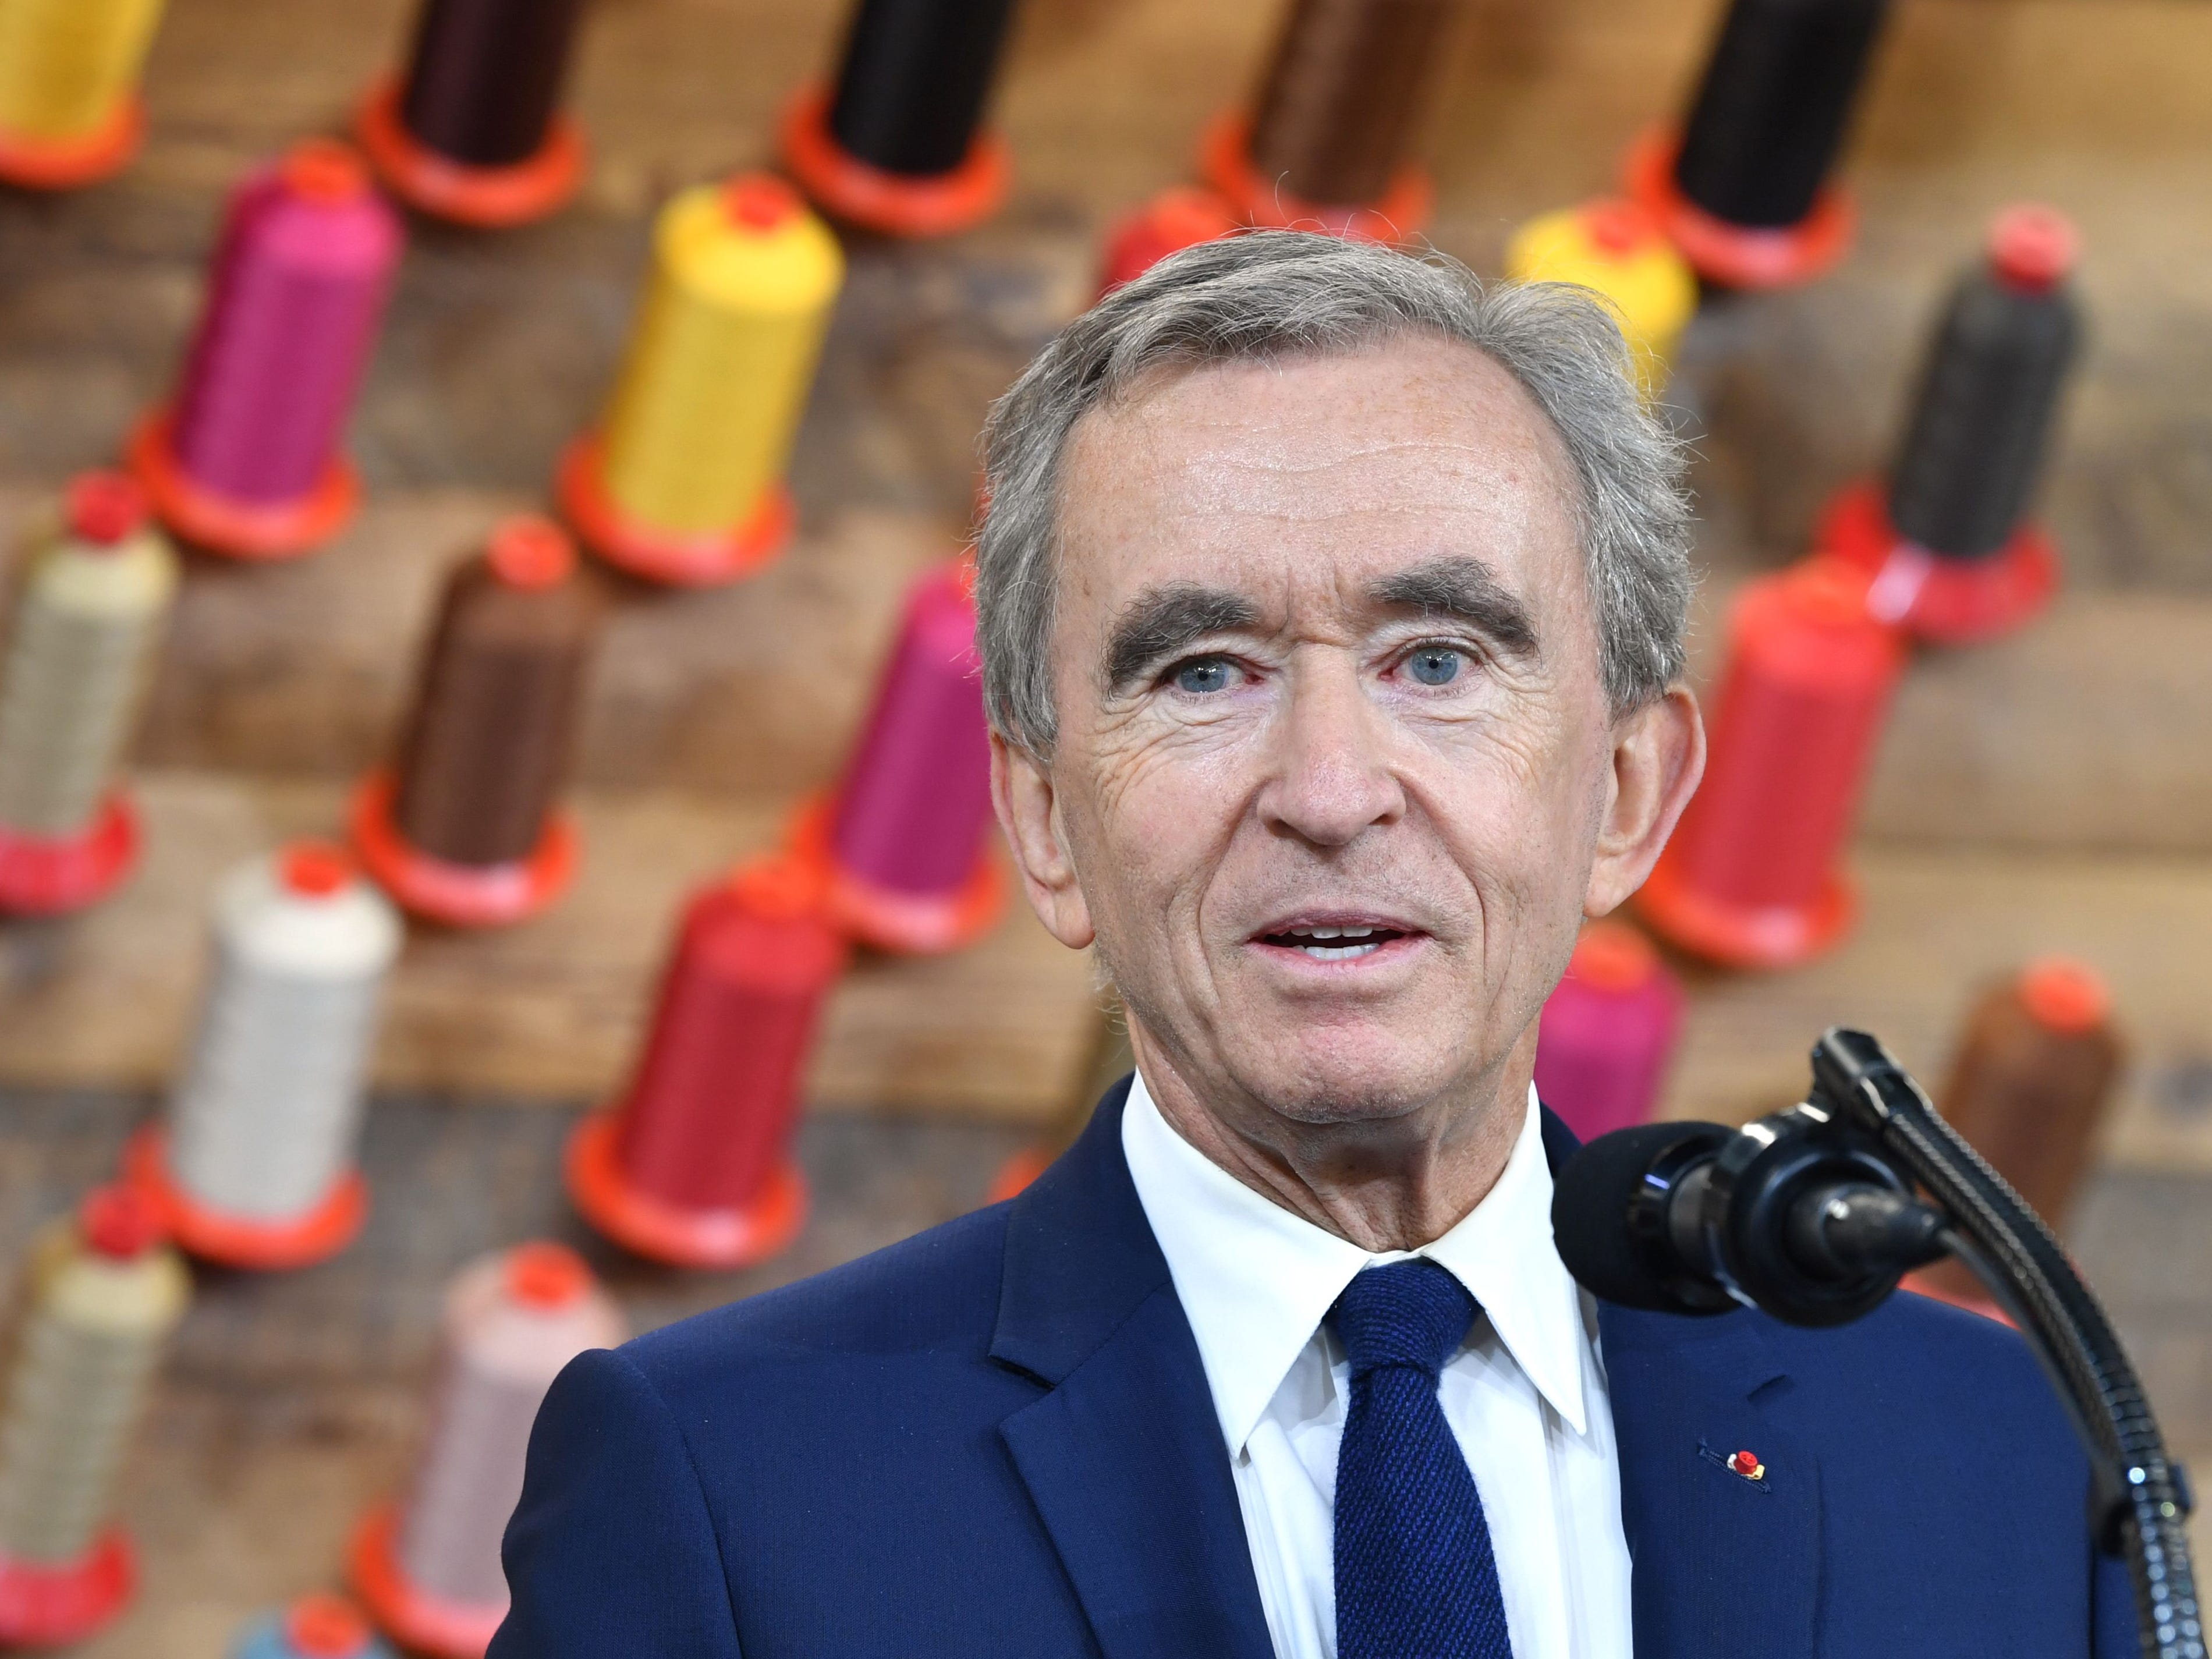 Louis Vuitton's watch director Jean Arnault wants to shake things up